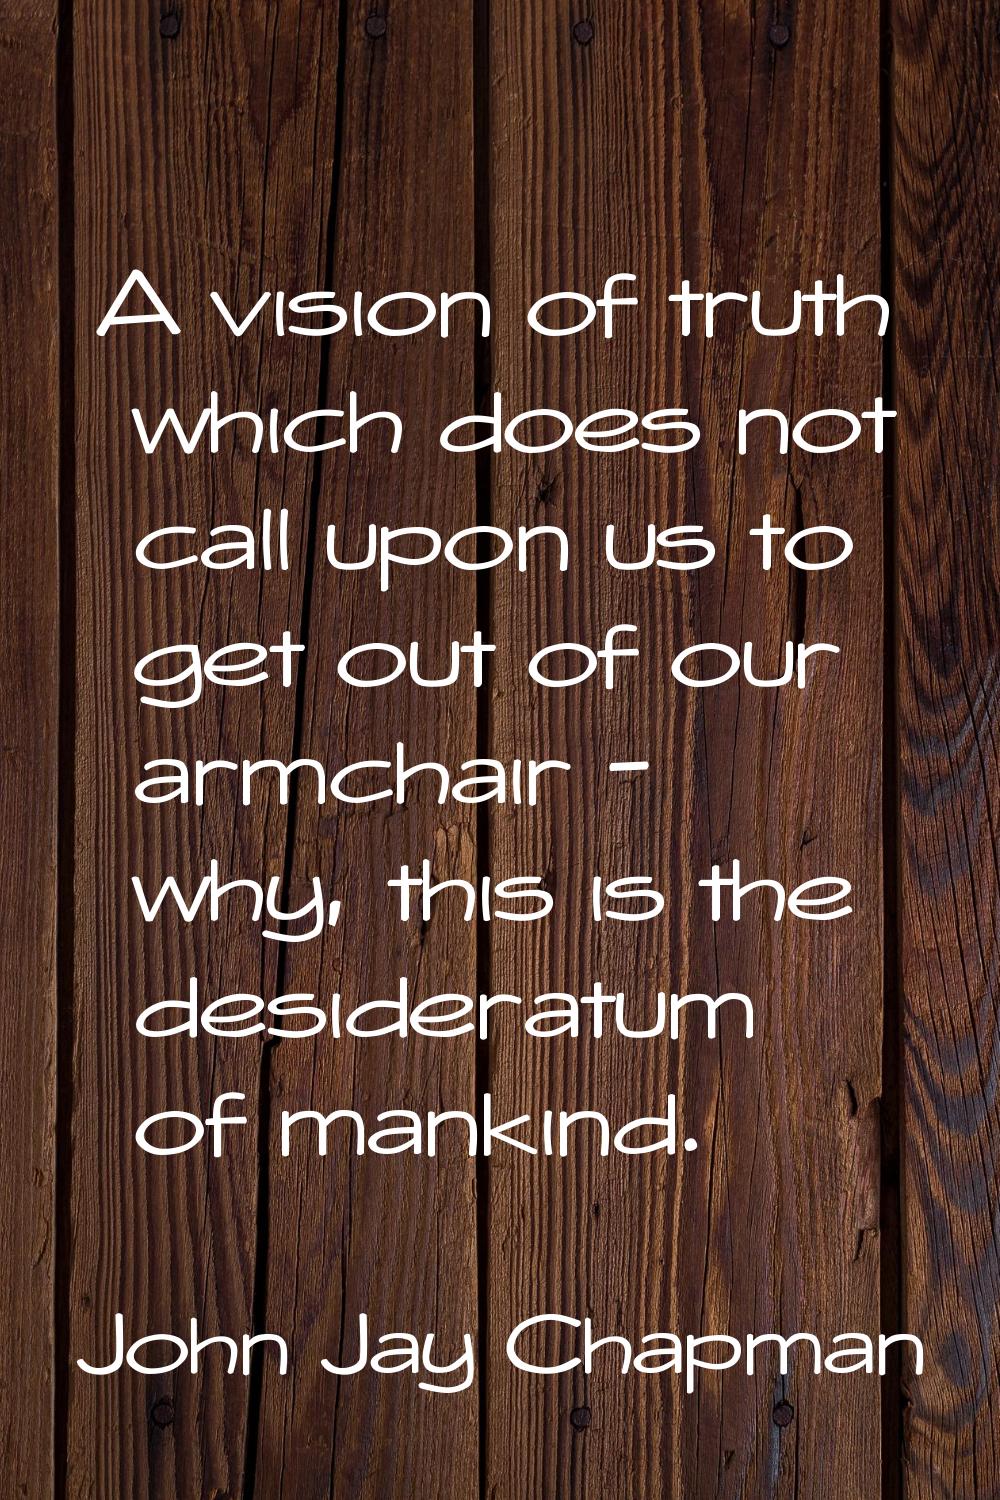 A vision of truth which does not call upon us to get out of our armchair - why, this is the desider